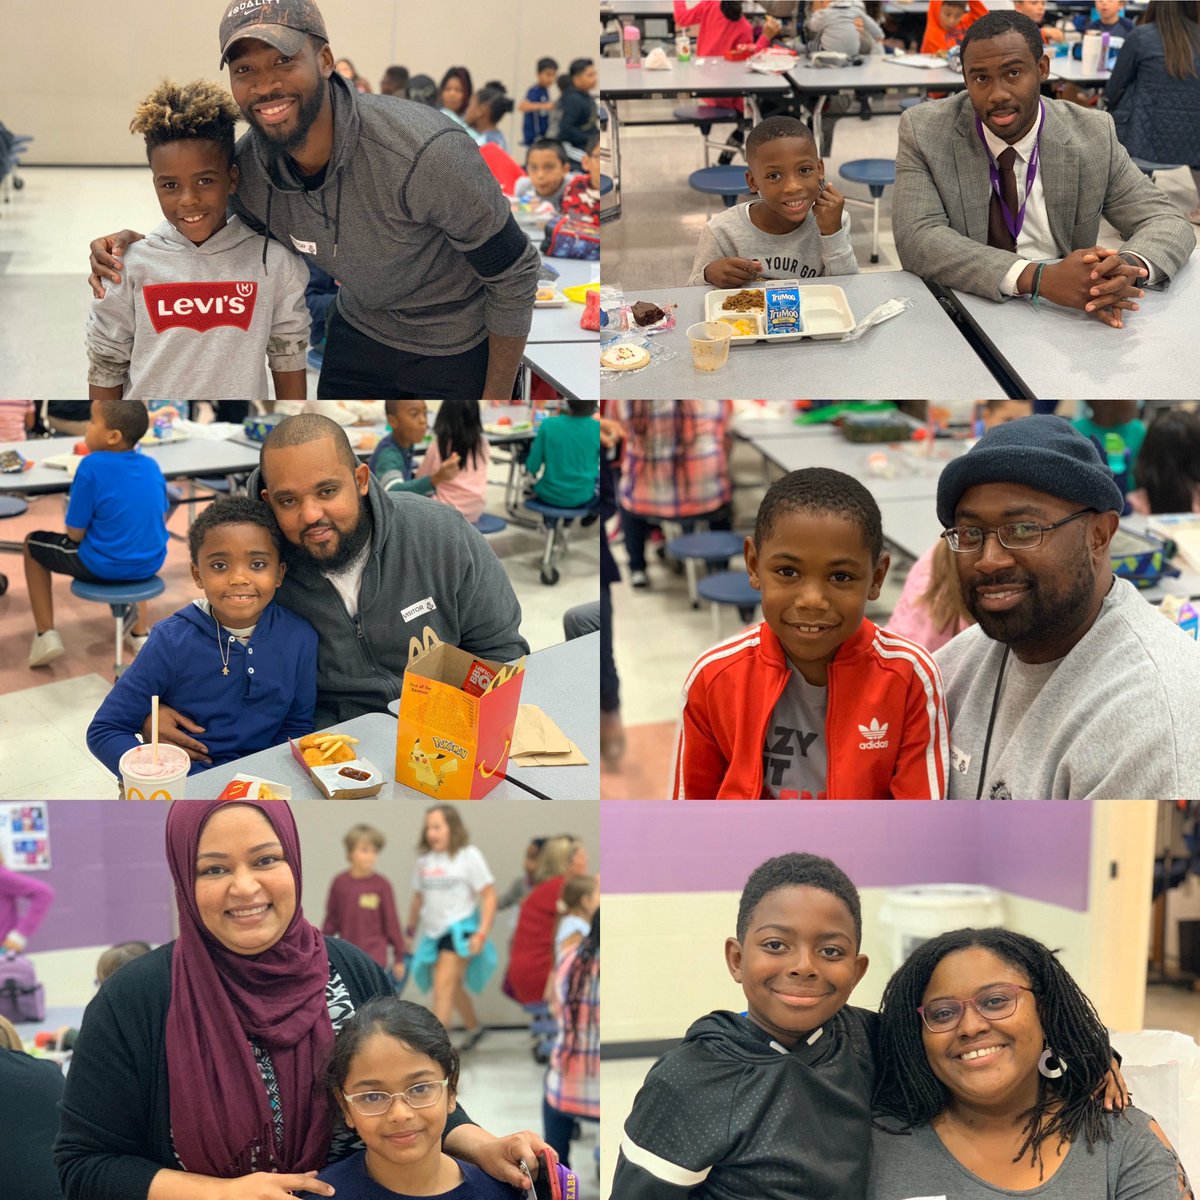 Over 3 Million kids eat lunch in school cafeterias each day! Did you know feeling happy & a sense of connection allows our bodies to digest food easier! Even eating connects to #SEL #SchoolLunchDay #ontheHil #100ParentVisitors #ComeAsYouAre 💛💜 @NorthwestWCPSS #ParentEngagement